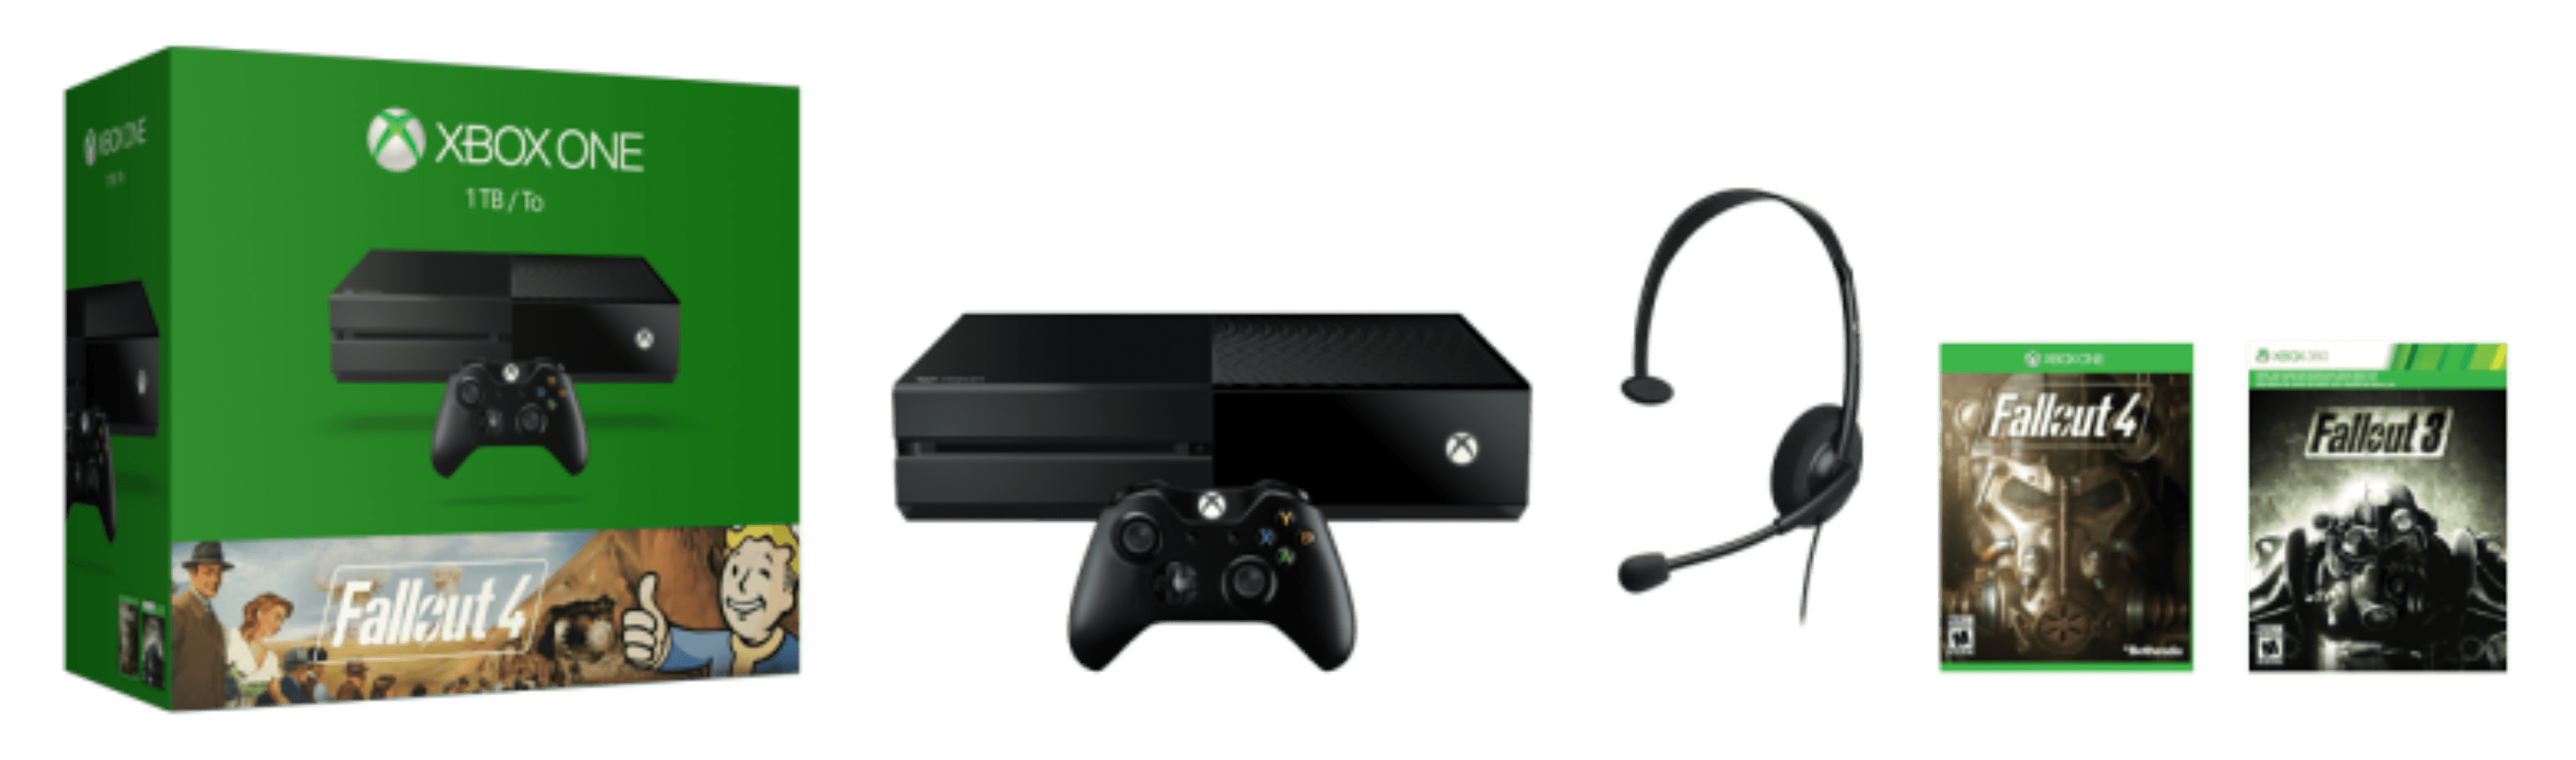 Final Xbox One Bundle Announced, And It’s A Big One!